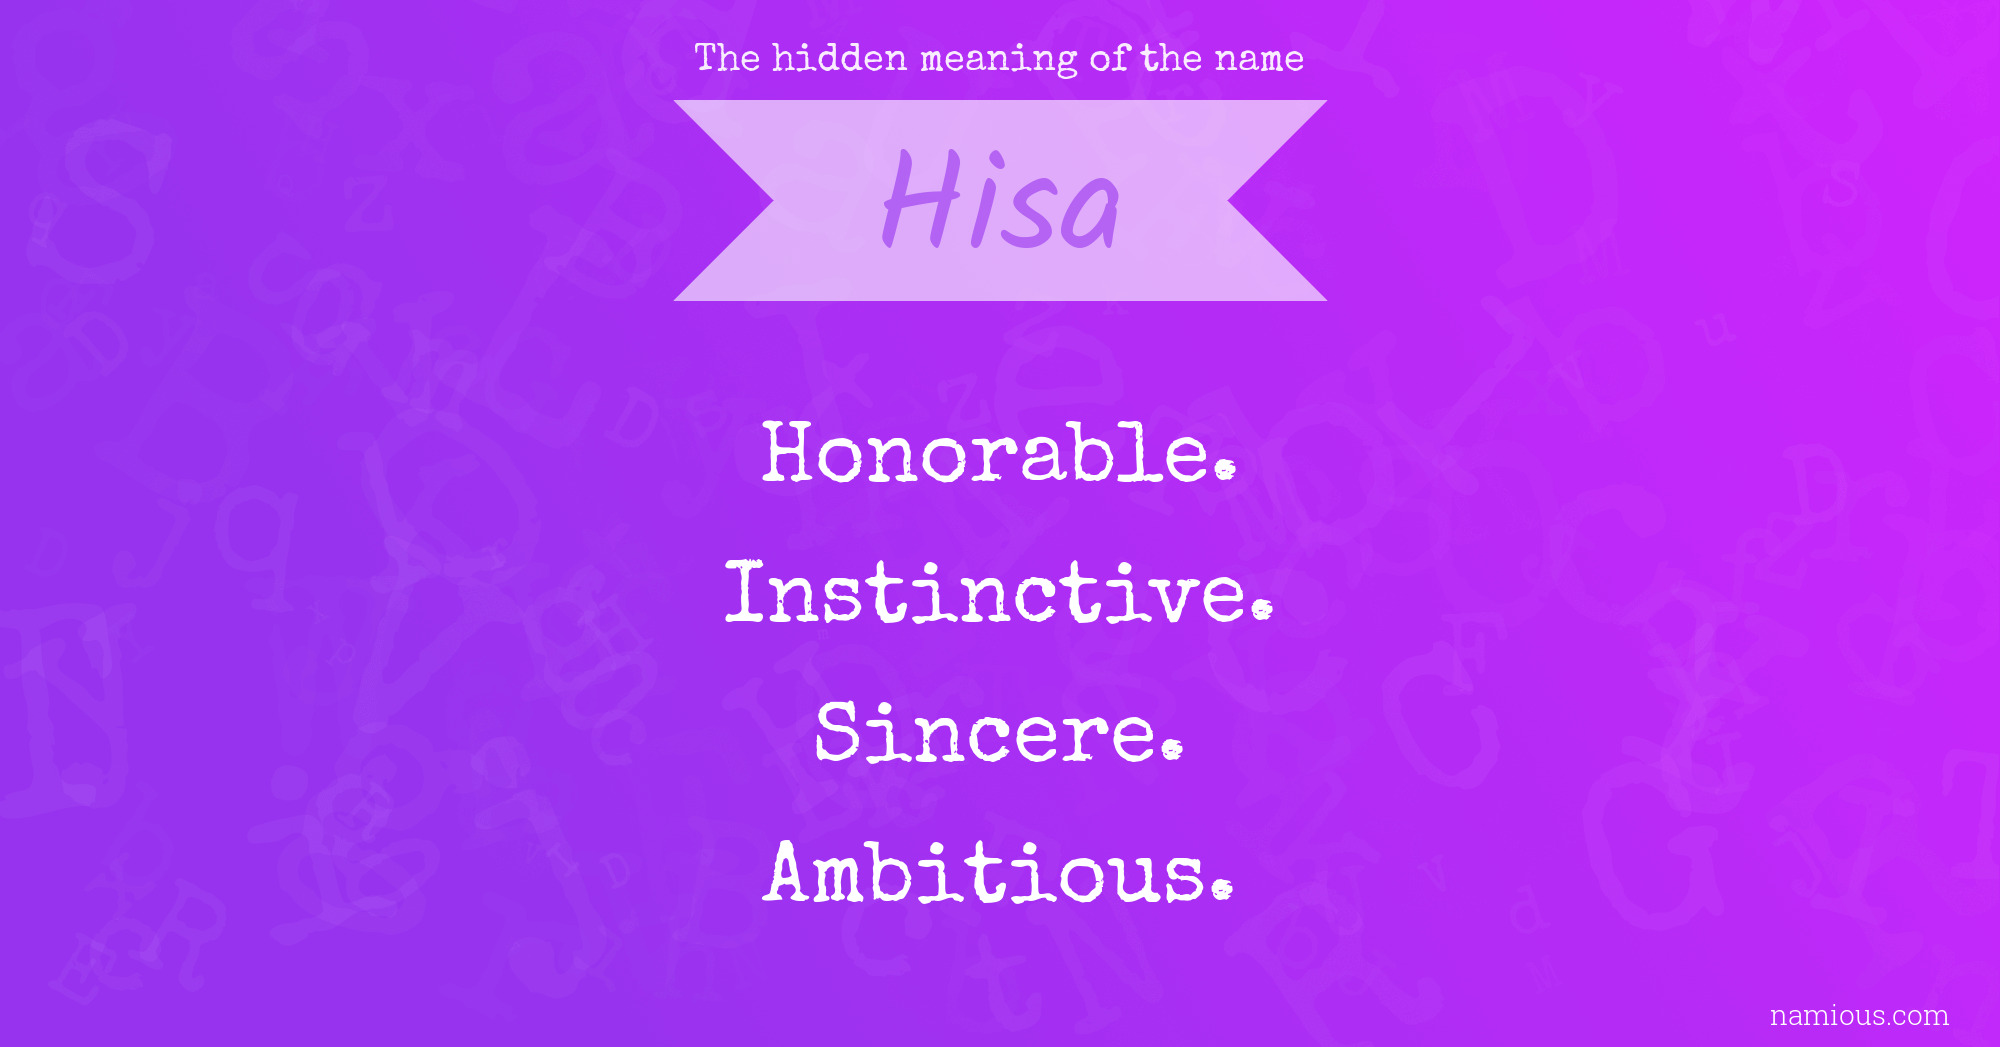 The hidden meaning of the name Hisa